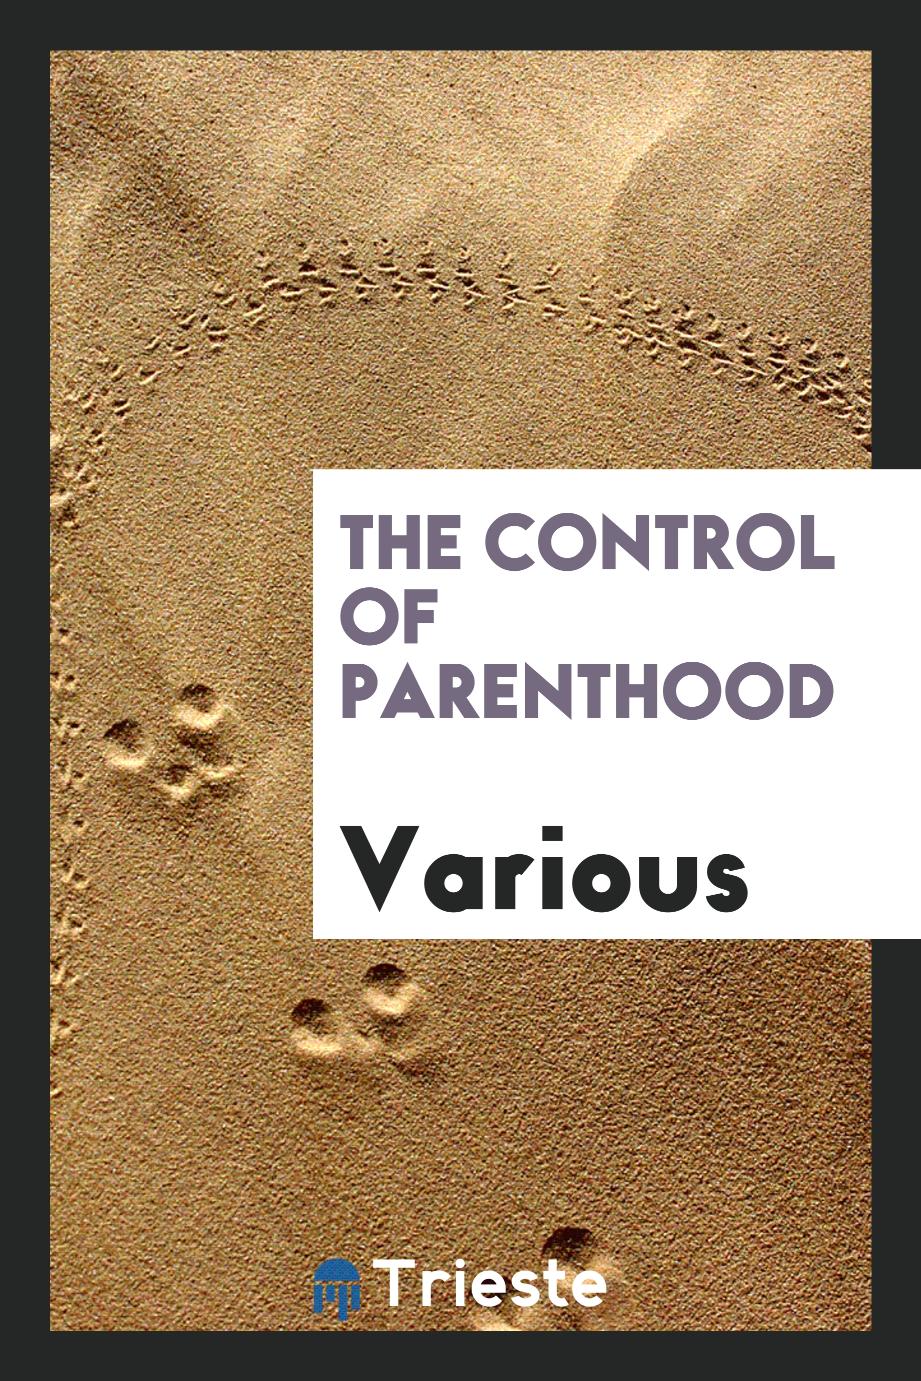 The control of parenthood